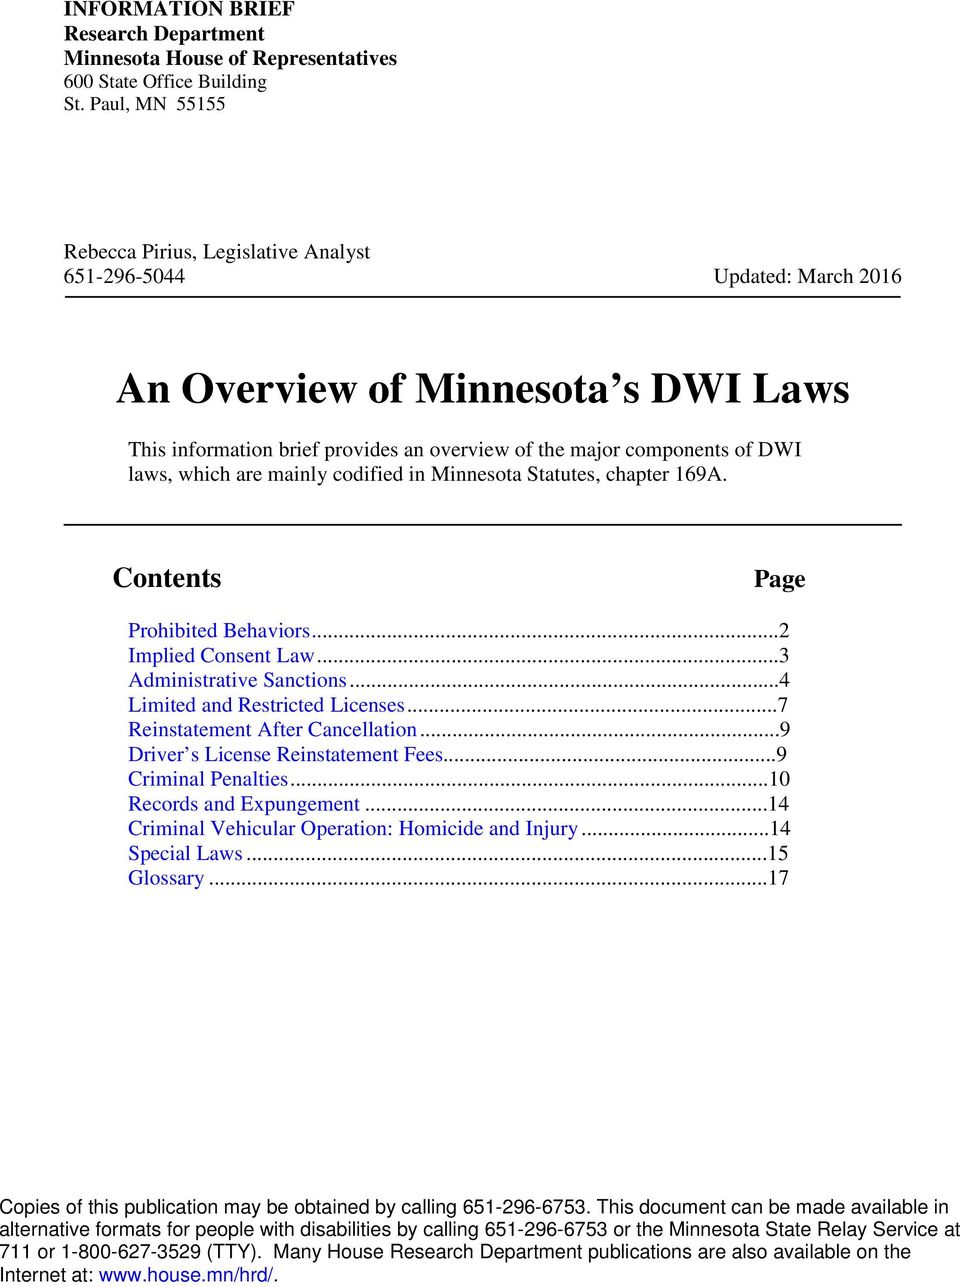 laws, which are mainly codified in Minnesota Statutes, chapter 169A. Contents Page Prohibited Behaviors...2 Implied Consent Law...3 Administrative Sanctions...4 Limited and Restricted Licenses.